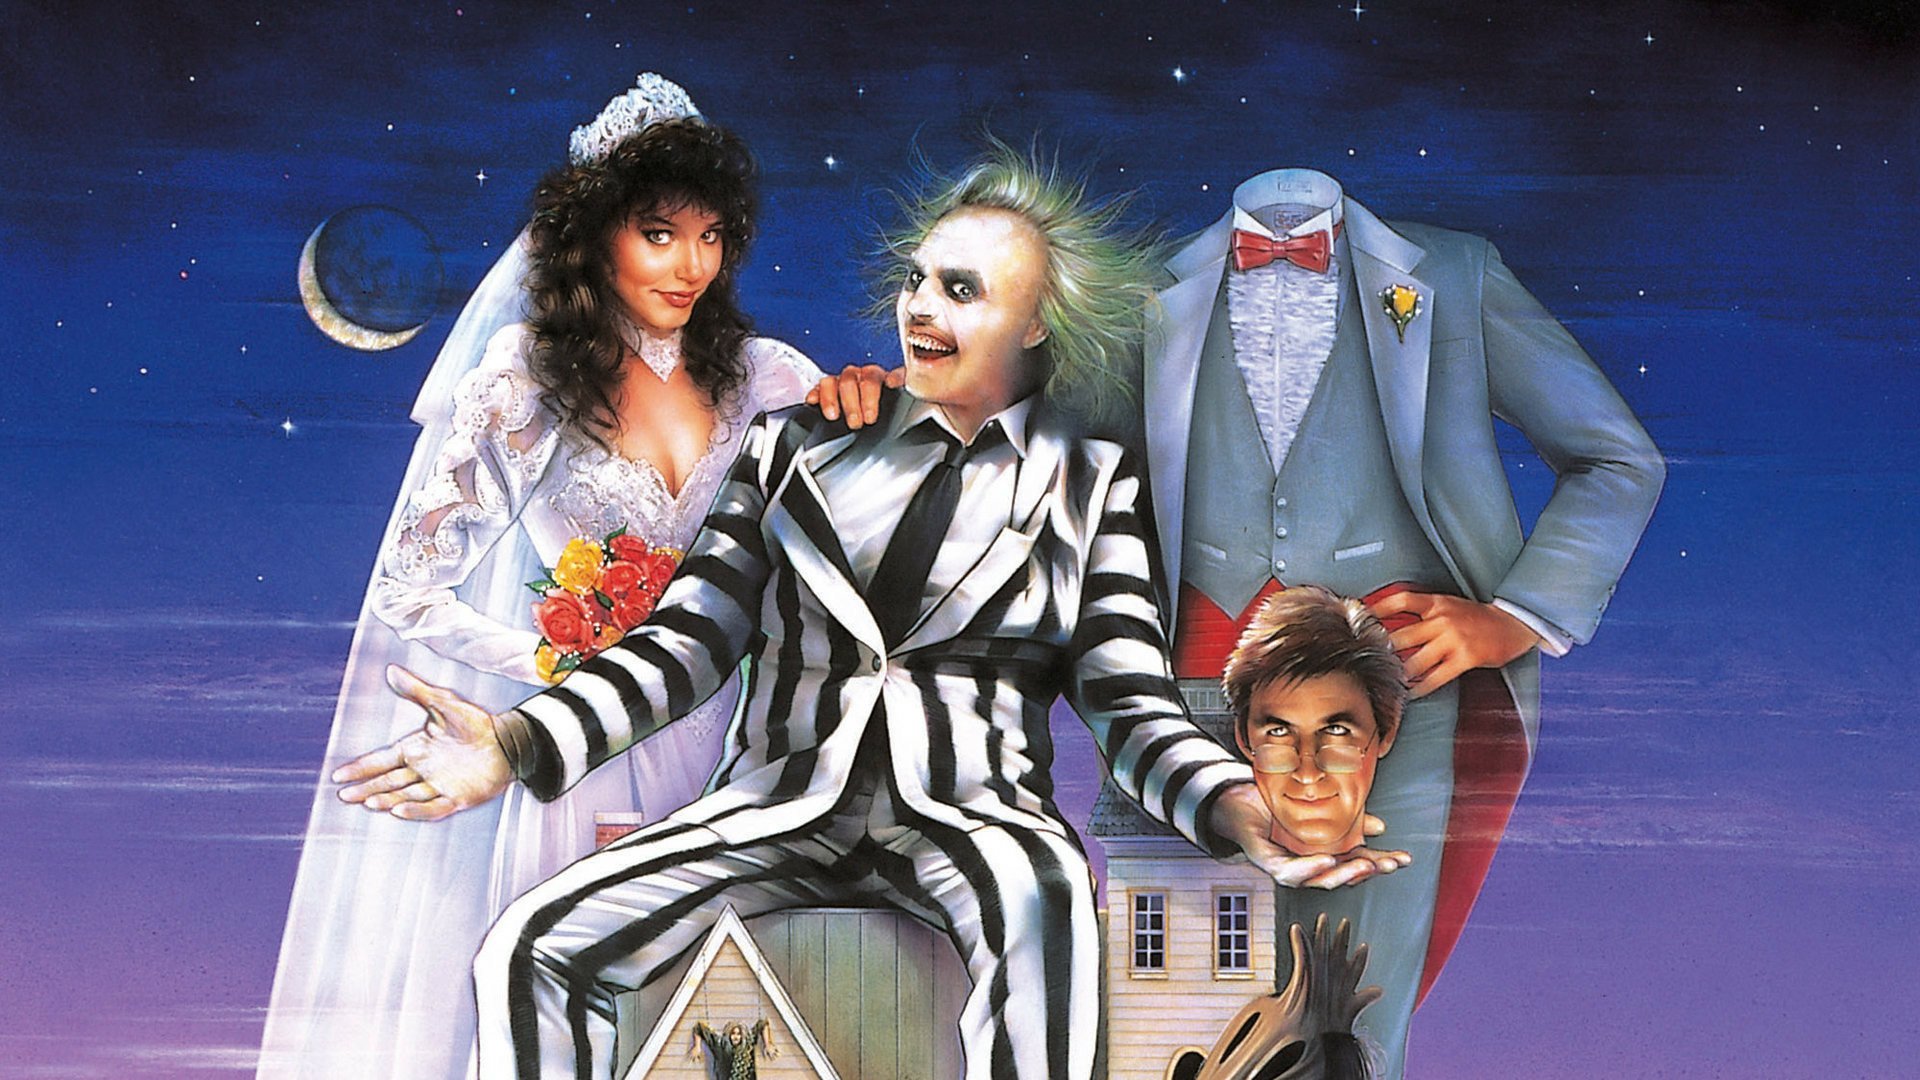 Beetlejuice Broadway homelockscreen wallpapers for anyone who missed them  in October  rBeetlejuiceMusical